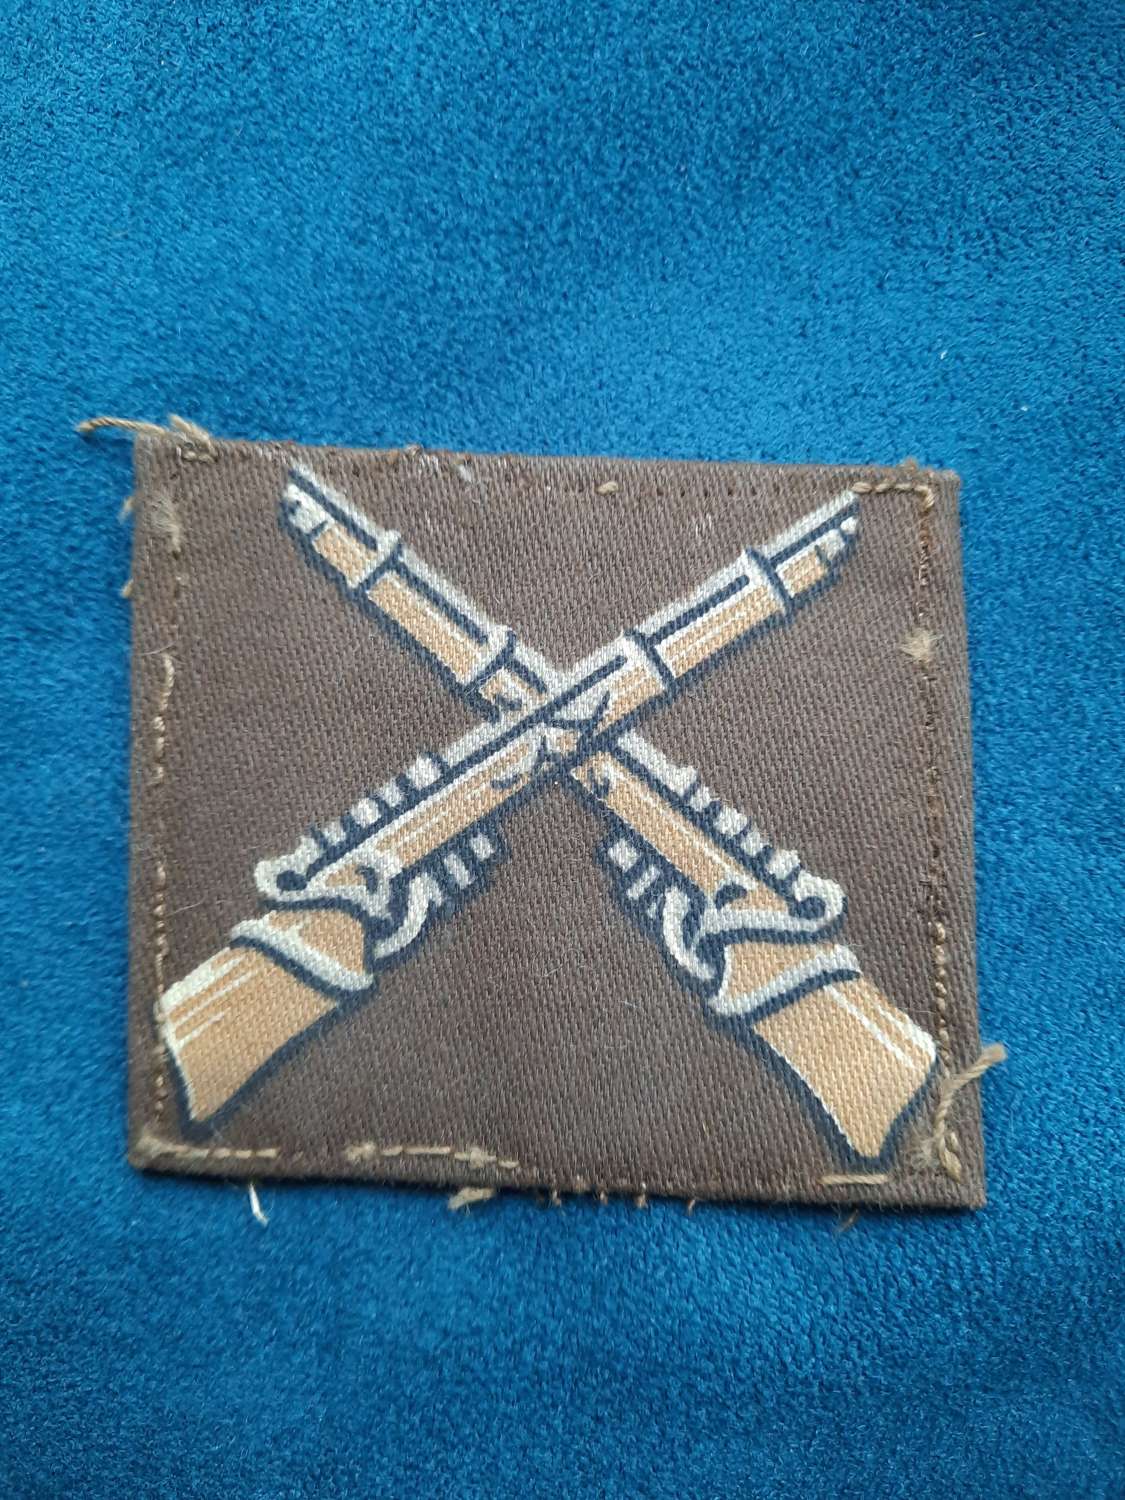 Weapons Training Instructor/ Marksman Printed patch